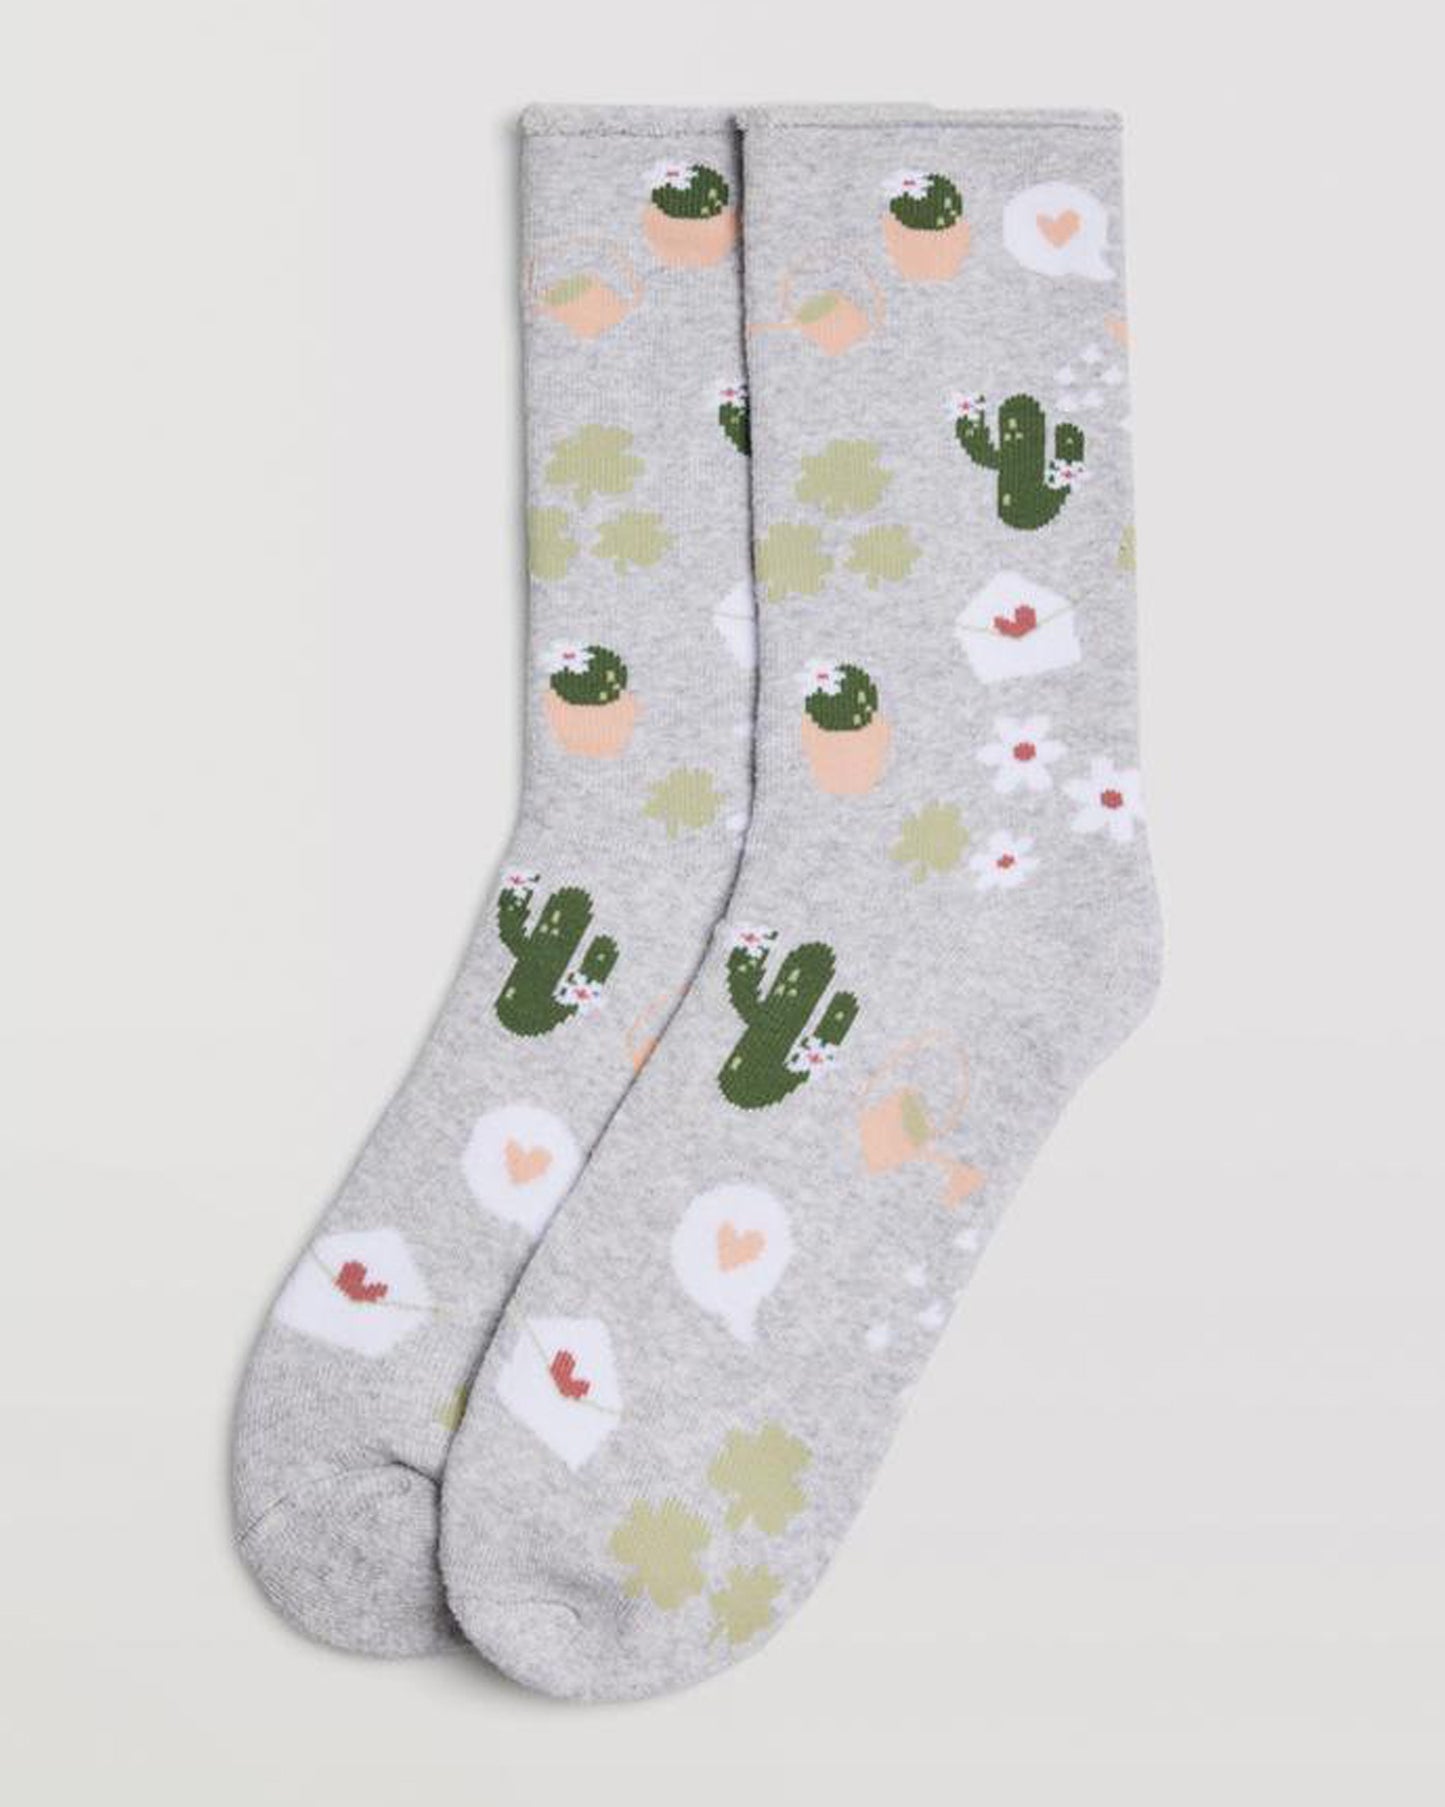  Ysabel Mora 12885 Gardener Sock - Light grey cotton thermal socks with a terry lining and all over gardener themed pattern in shades of green, pink, peach and white, shaped heel and no cuff comfort top.